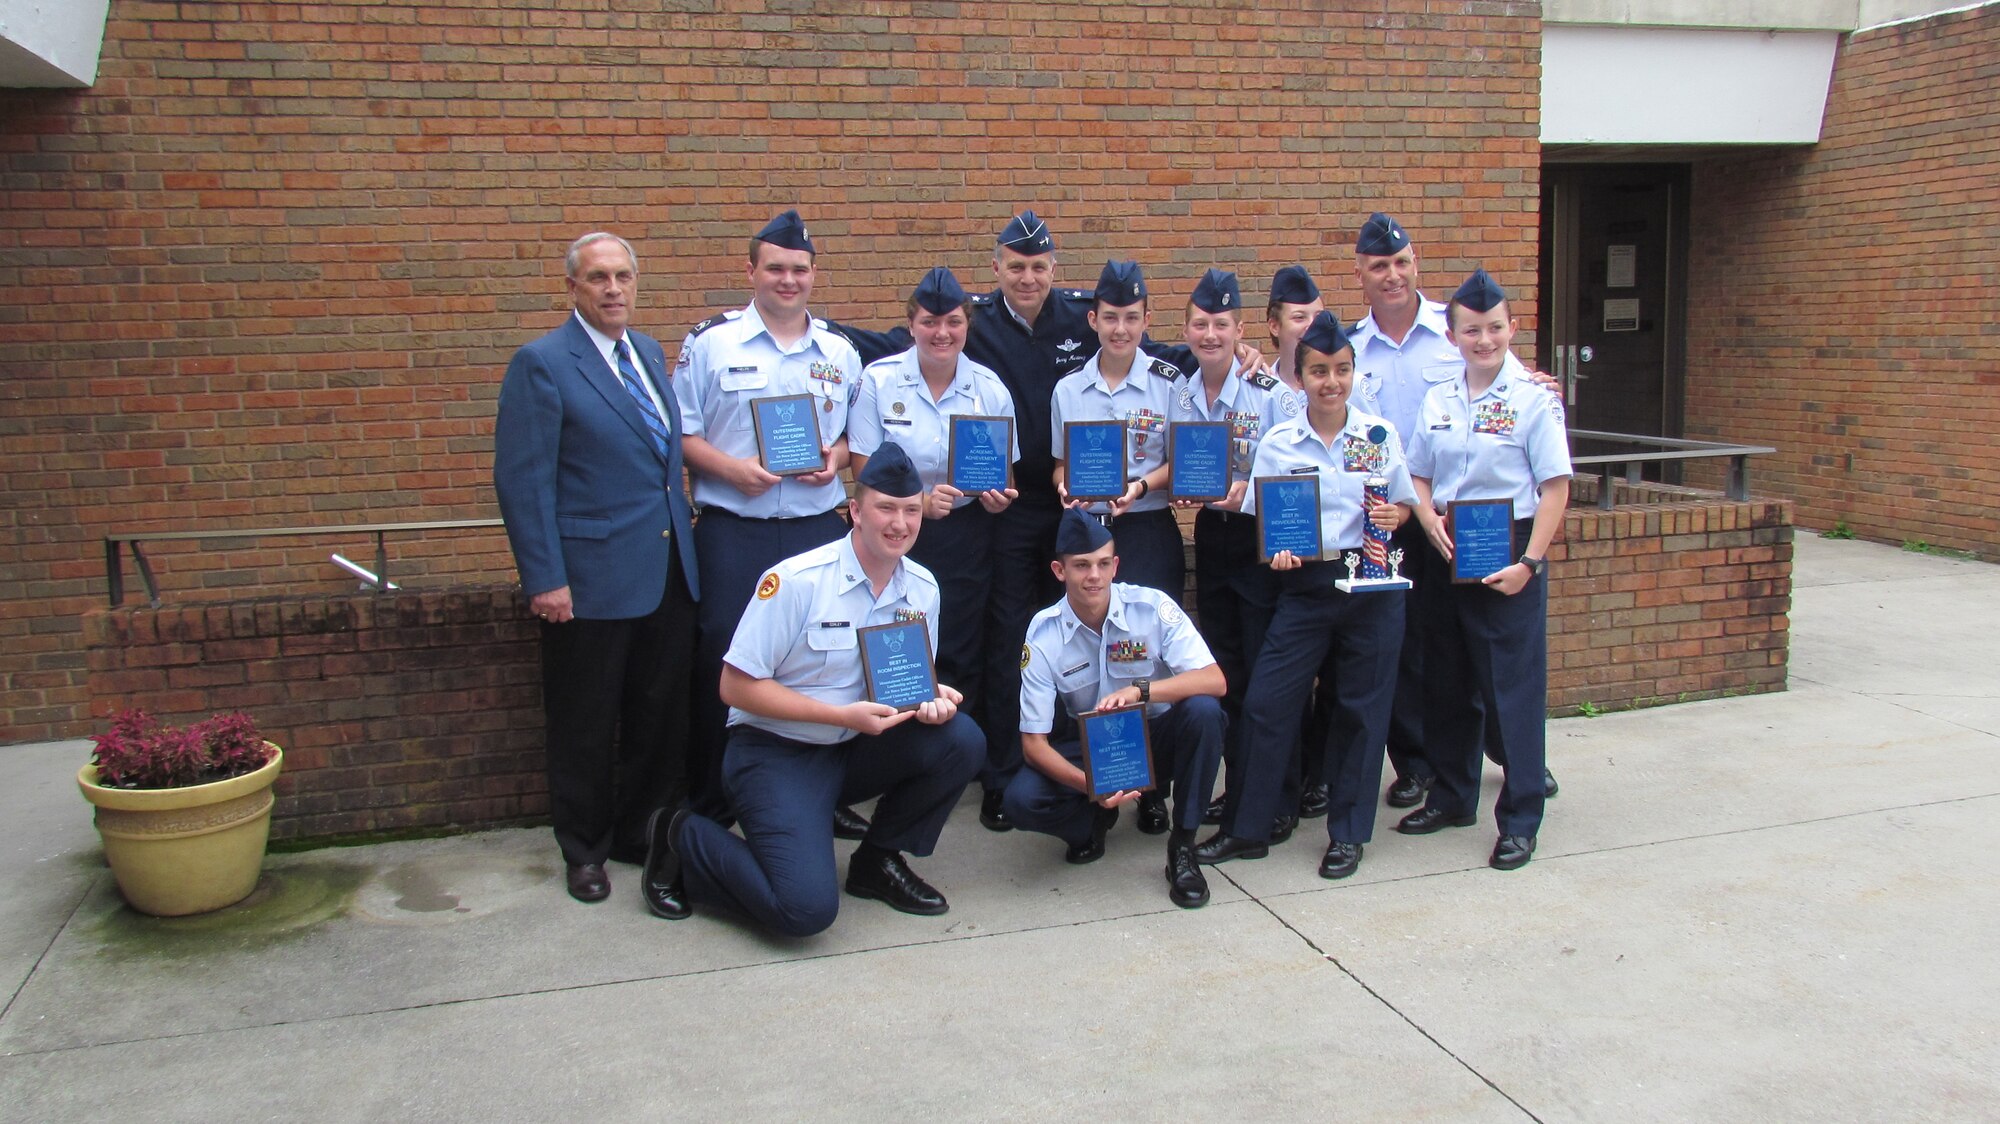 Major Gen. Jerry Martinez (center), the director of operations for Air Mobility Command, poses with Air Force JROTC cadets and was the guest speaker for the graduation event for the ‘Mountaineer Cadet Officer Leadership School,’ held in Athens, West Virginia, June 19-25. (Courtesy photo)